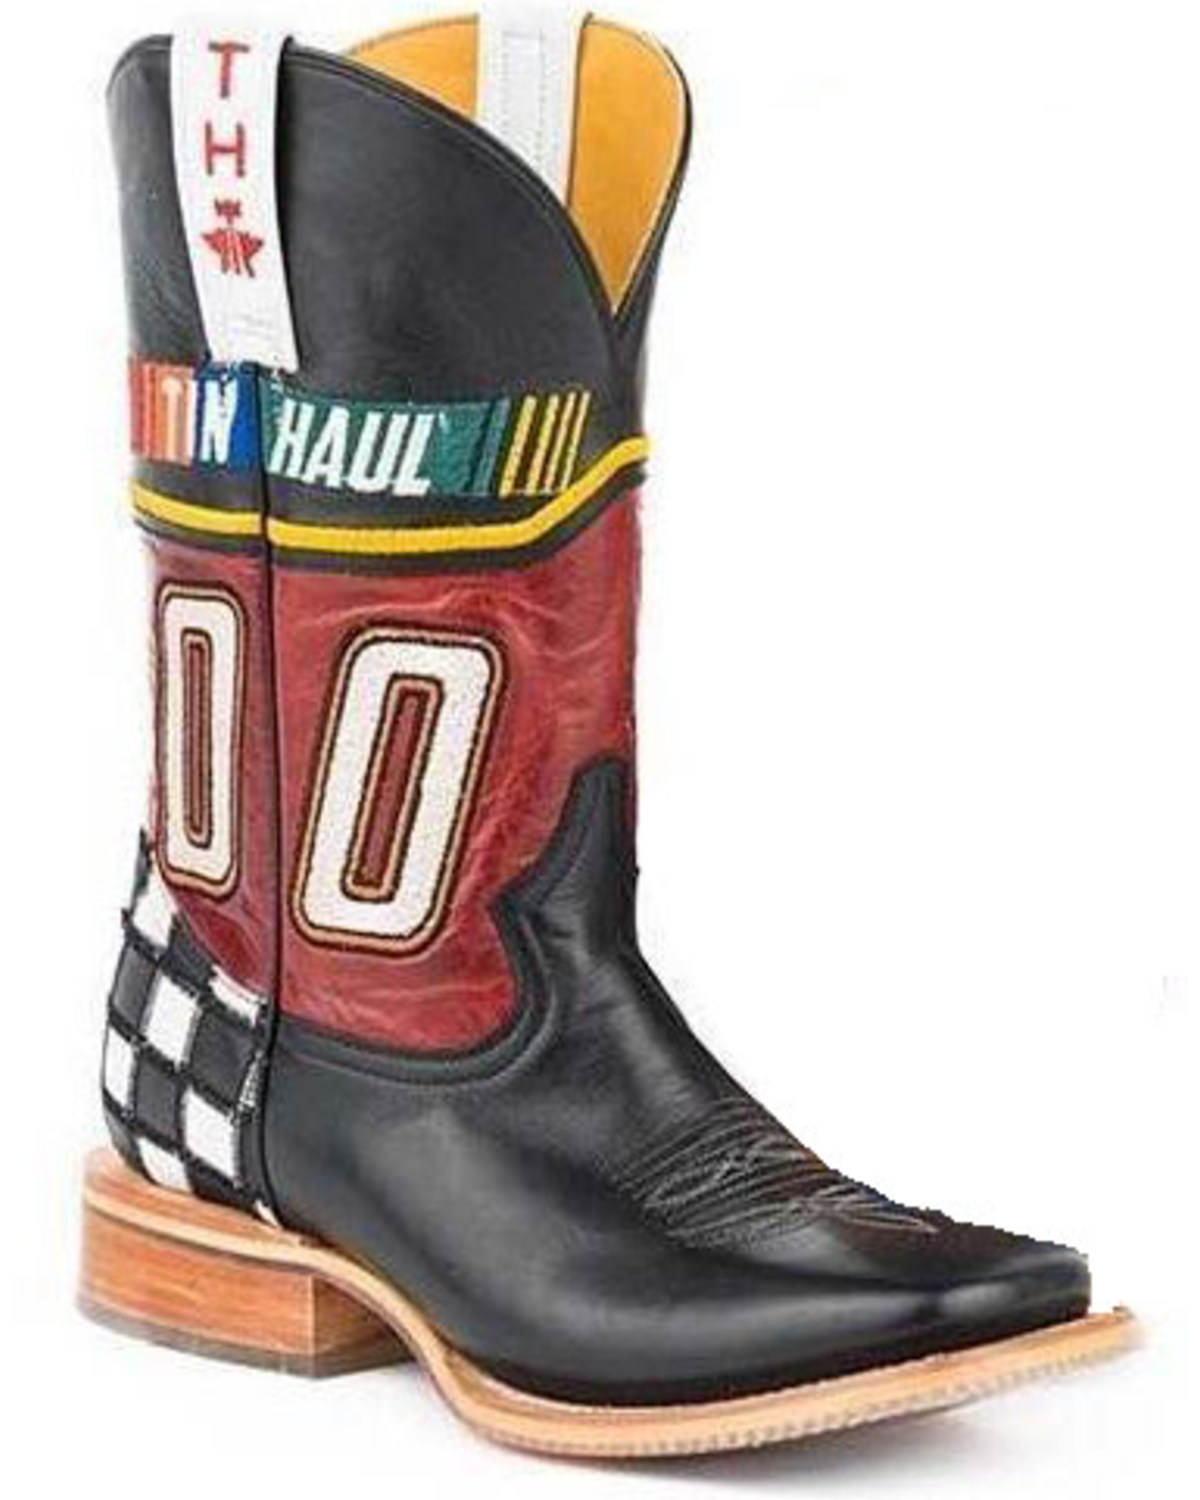 Mens Tin Haul Running Hot Boots with Racing Cars Sole Handcrafted